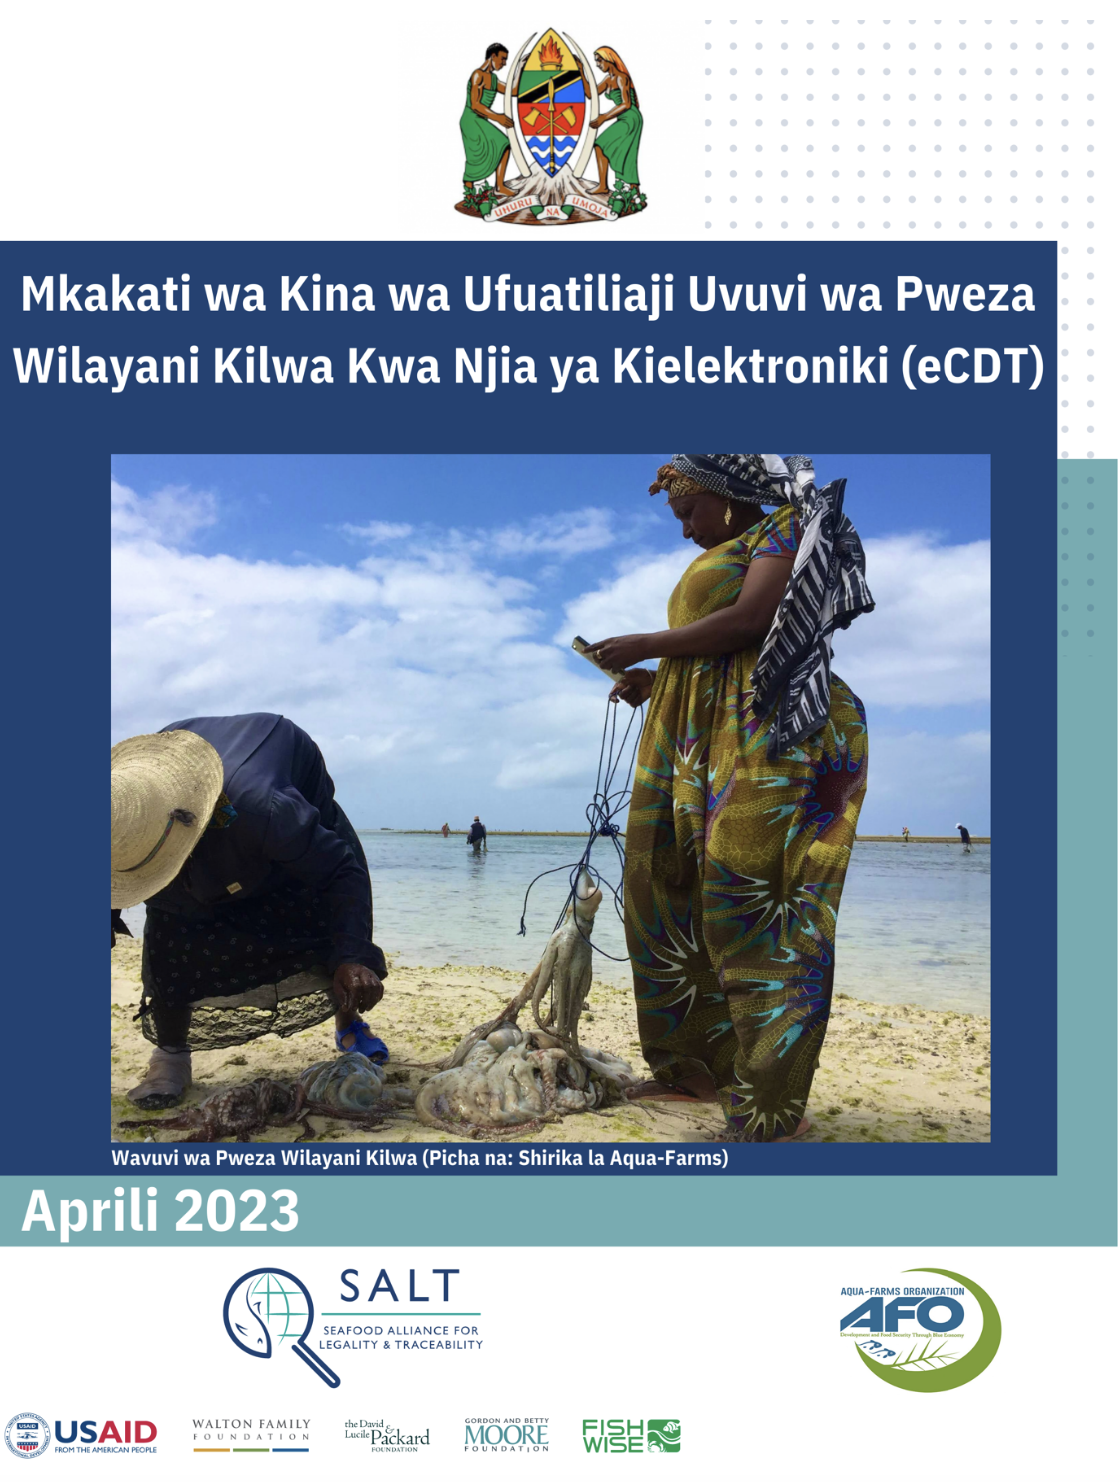 Report cover page and title is in Swahili with SALT, AFO, and MLF logo. Two women octopus fishers on the beach in Kilwa District. Octopus catch shown on a line and one woman is holding a smart phone while the other is leaning over